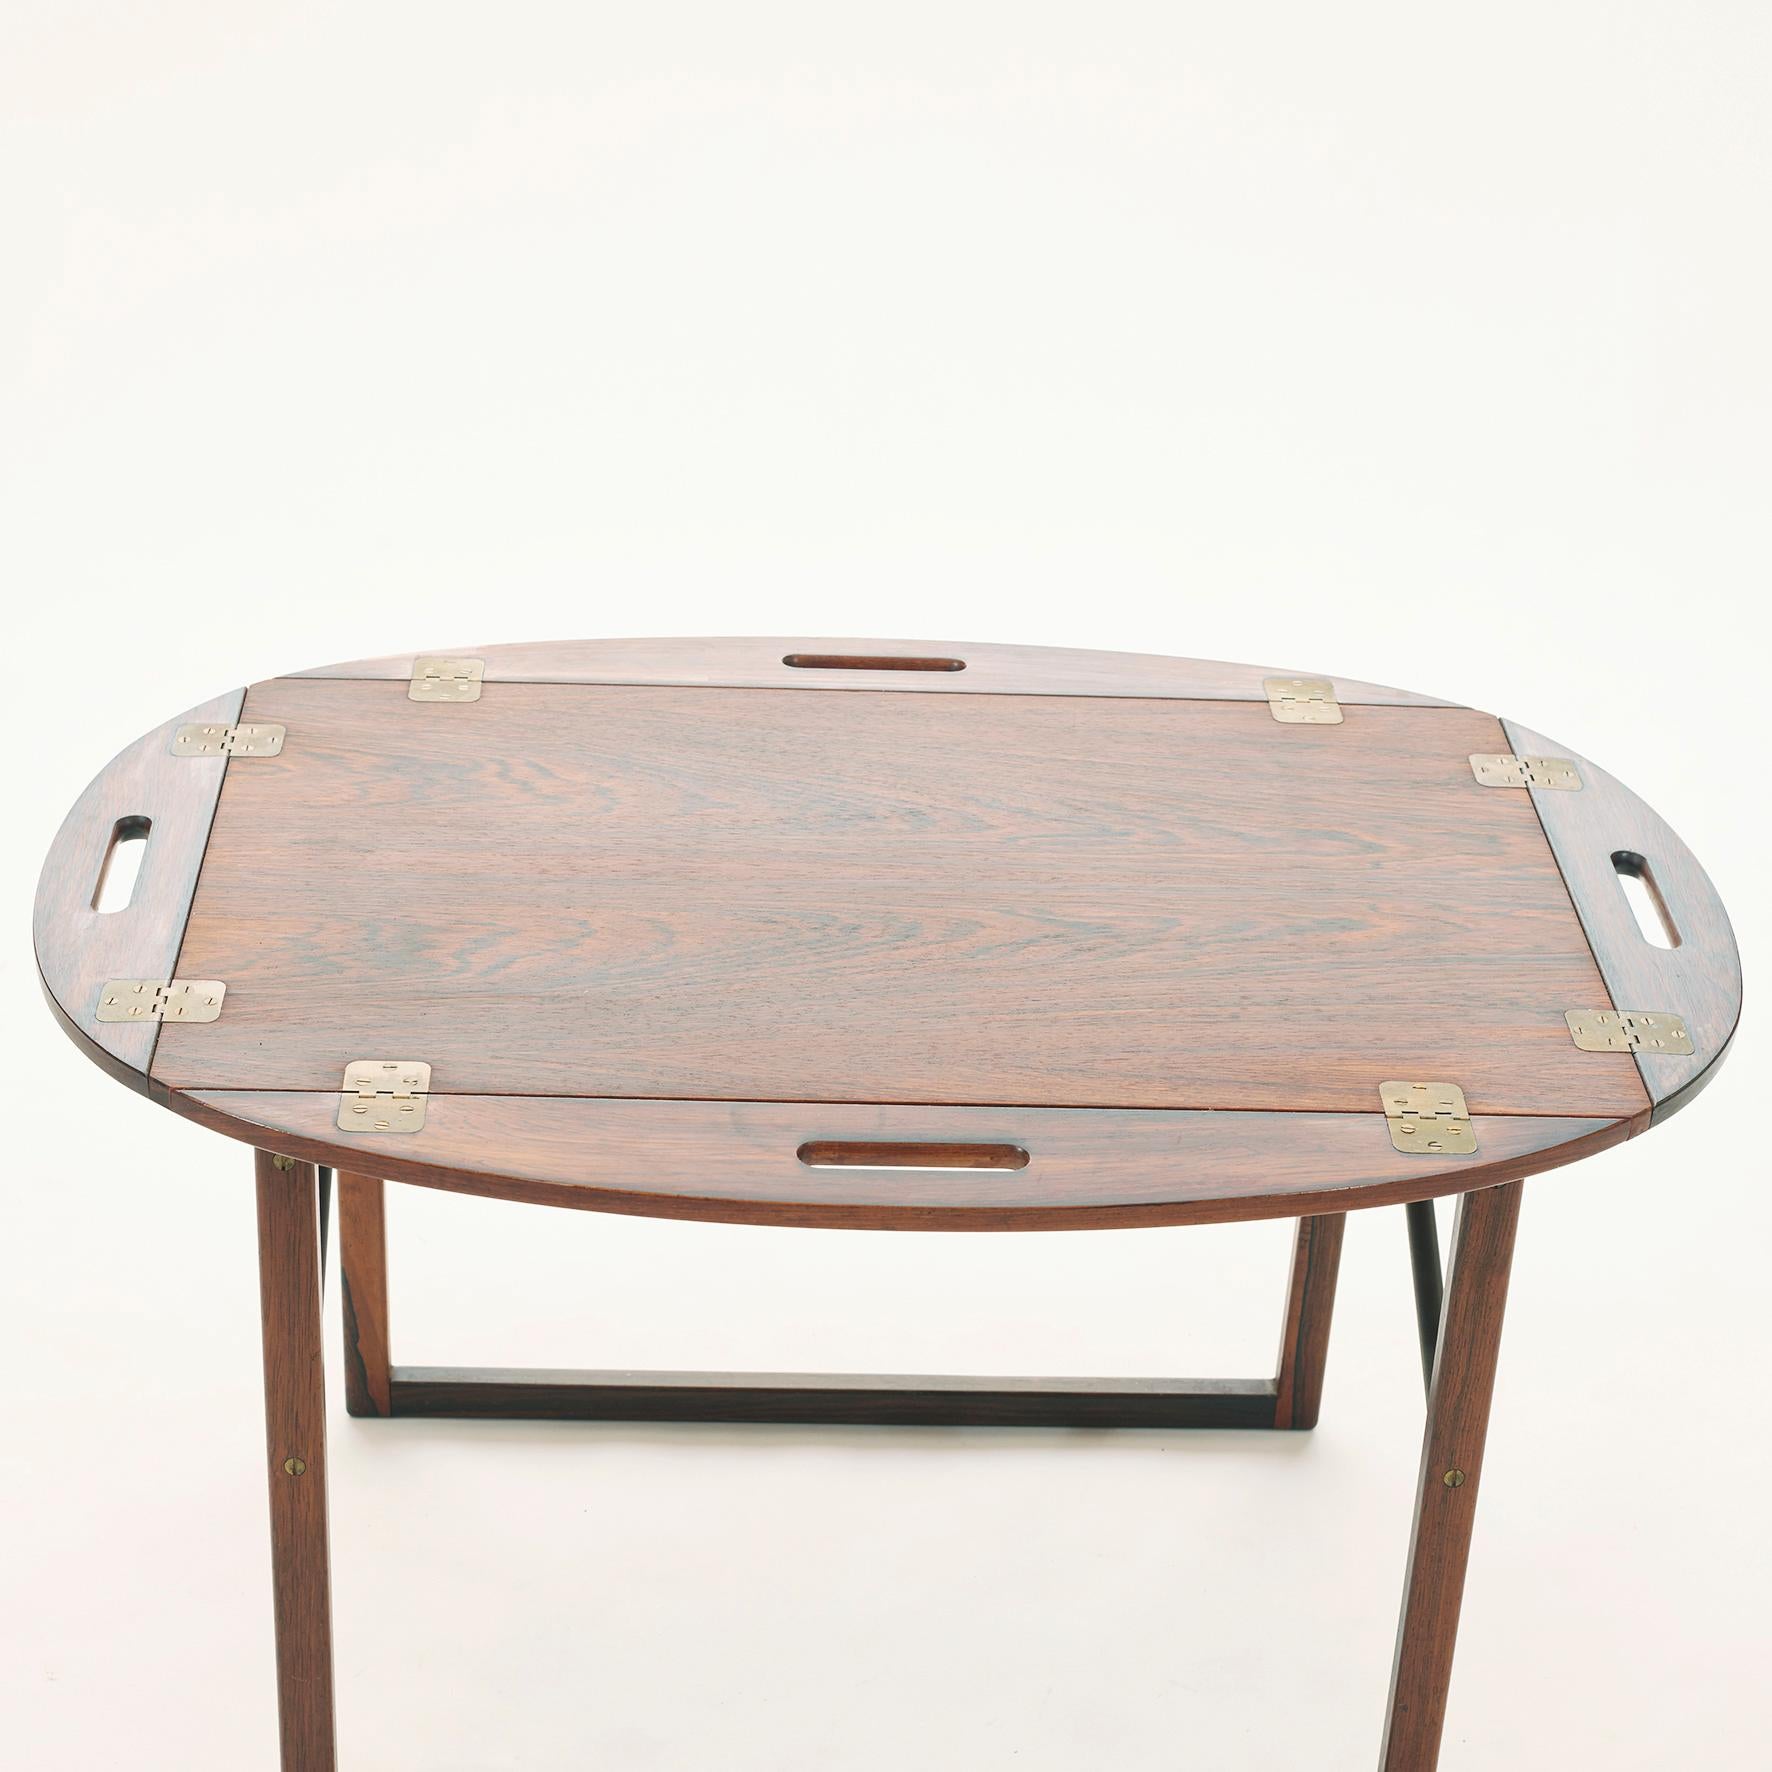 Tray table in rosewood with a removable tray top. Brass hinged edges flip up to convert to handles. 
Danish modern design by Svend Langkilde for Illums Bolighus 1960s.


Dimensions
H 20 in. x W 35 in. x D 24 in.
H 51 cm x W 88 cm x D 61 cm.